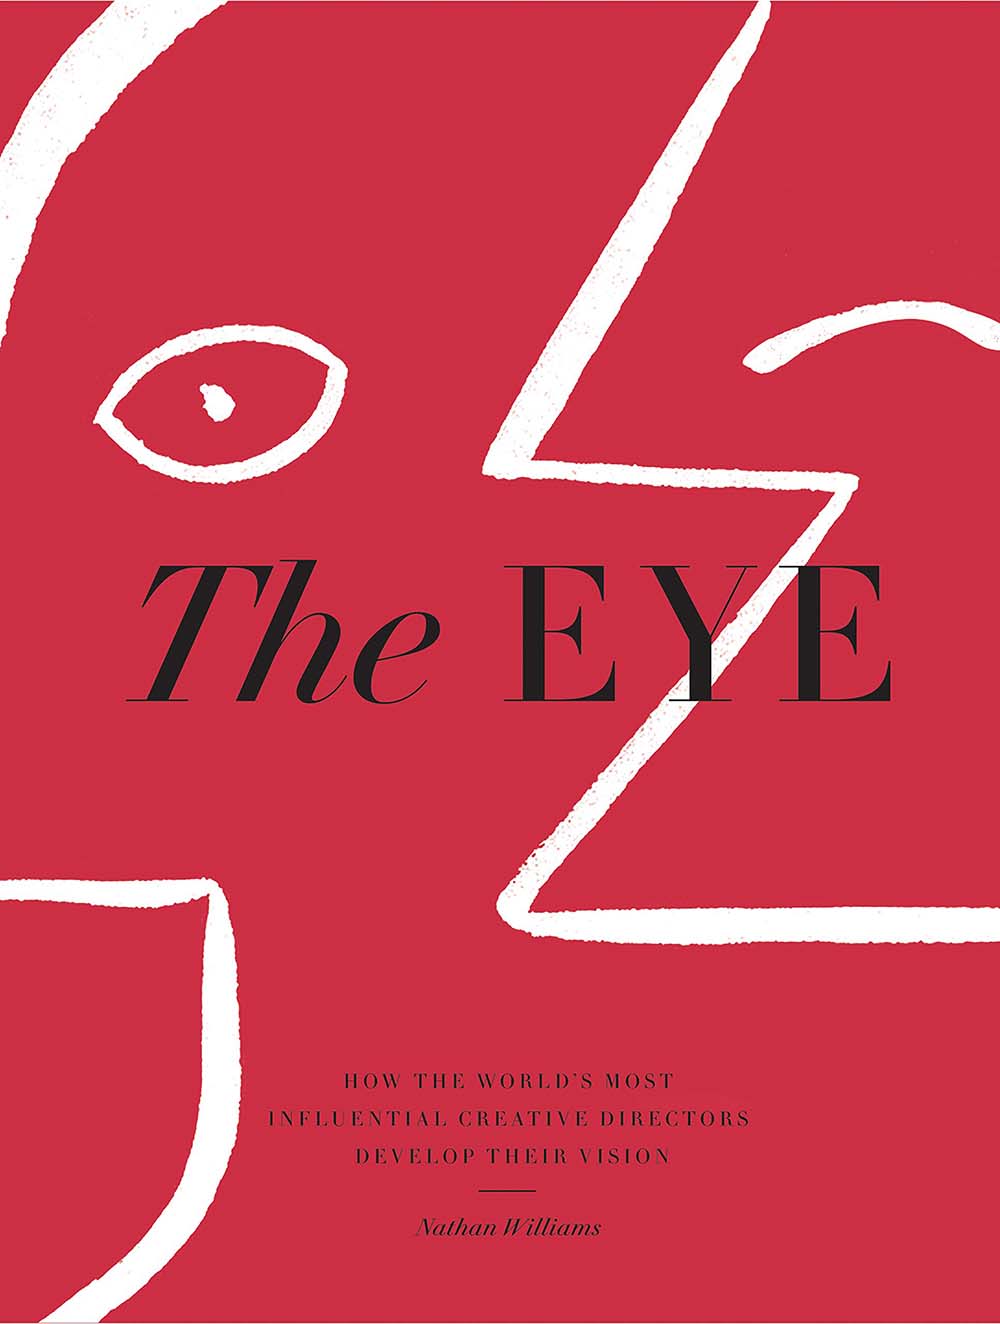 The Eye: How the World’s Most Influential Creative Directors Develop Their Vision